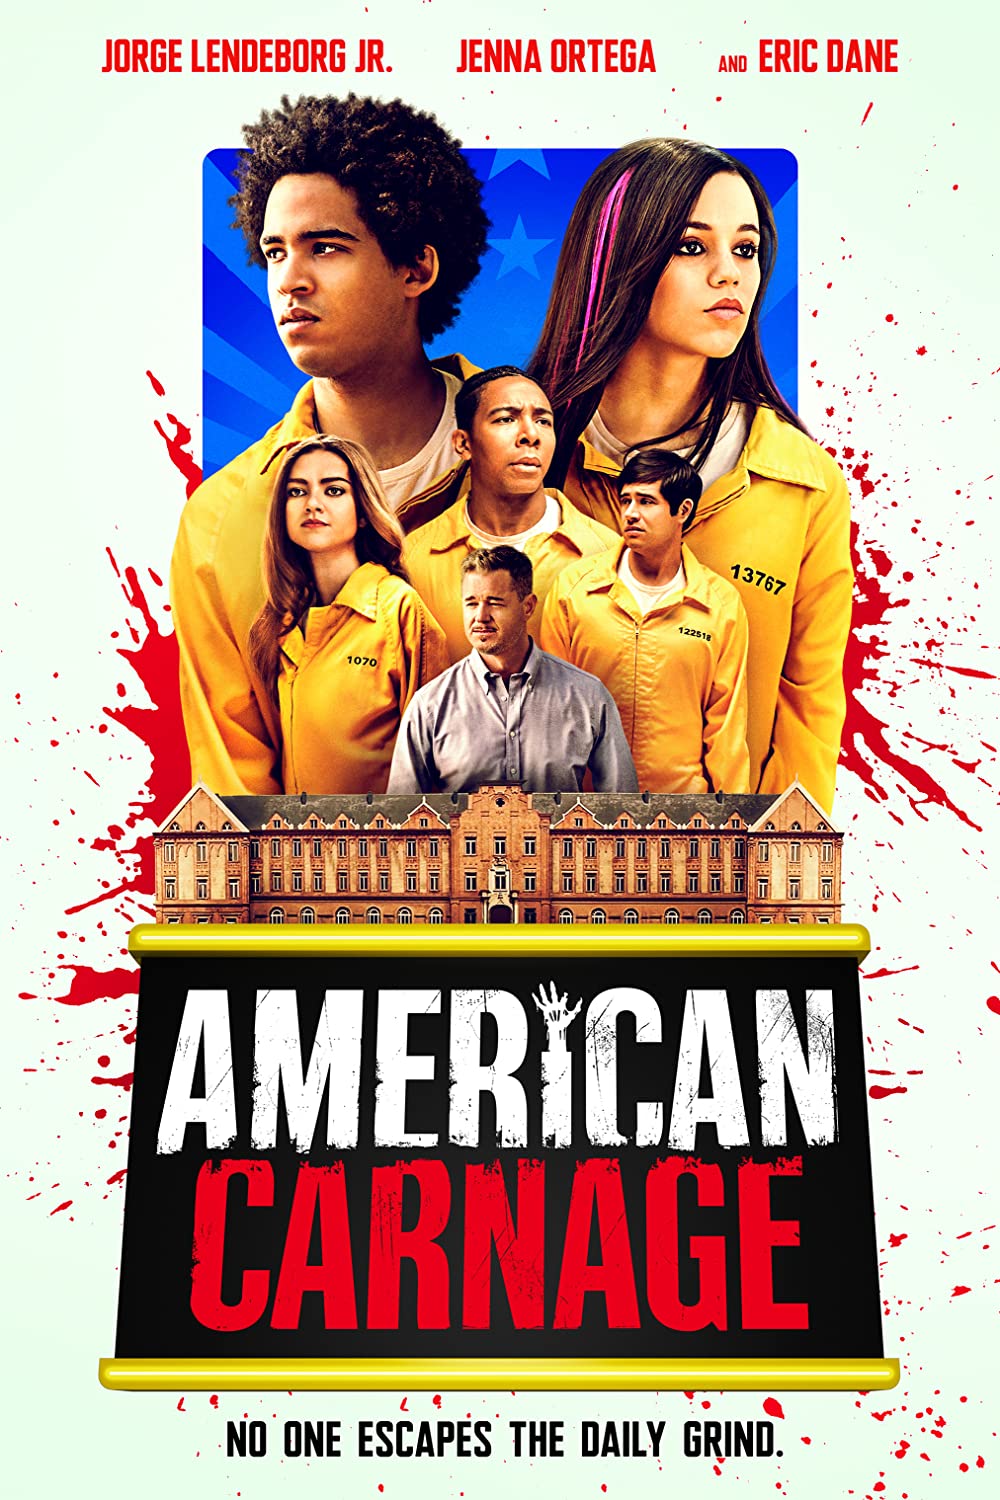 American Carnage Trailer & Poster